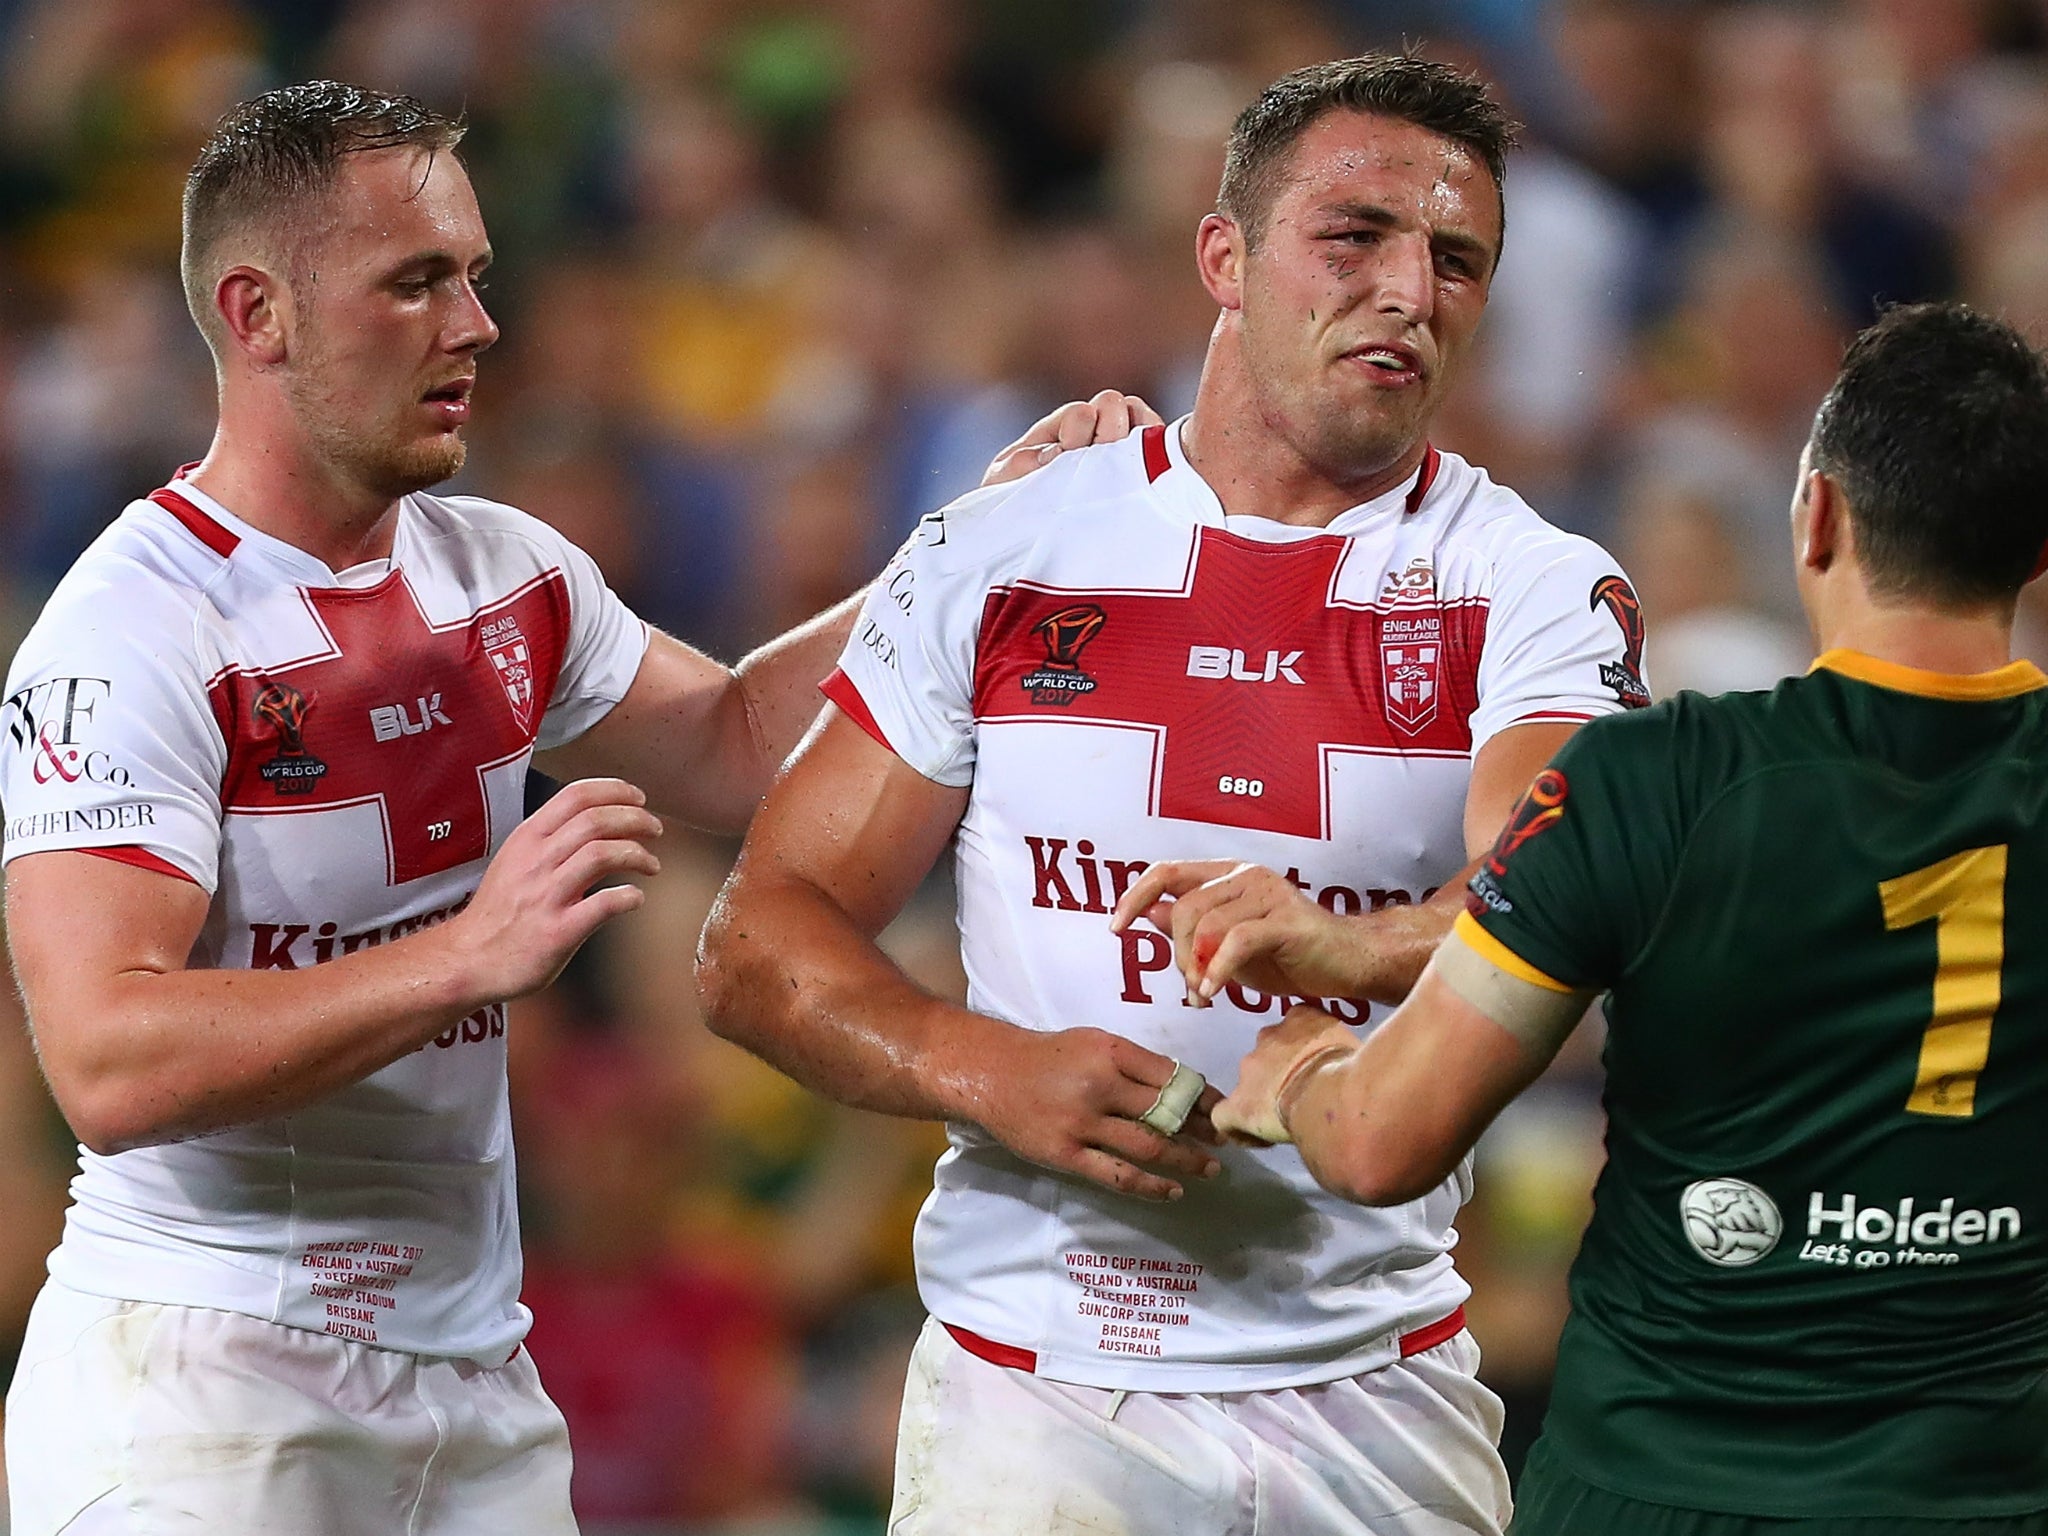 Sam Burgess squares up to Billy Slater in the dying seconds of the match